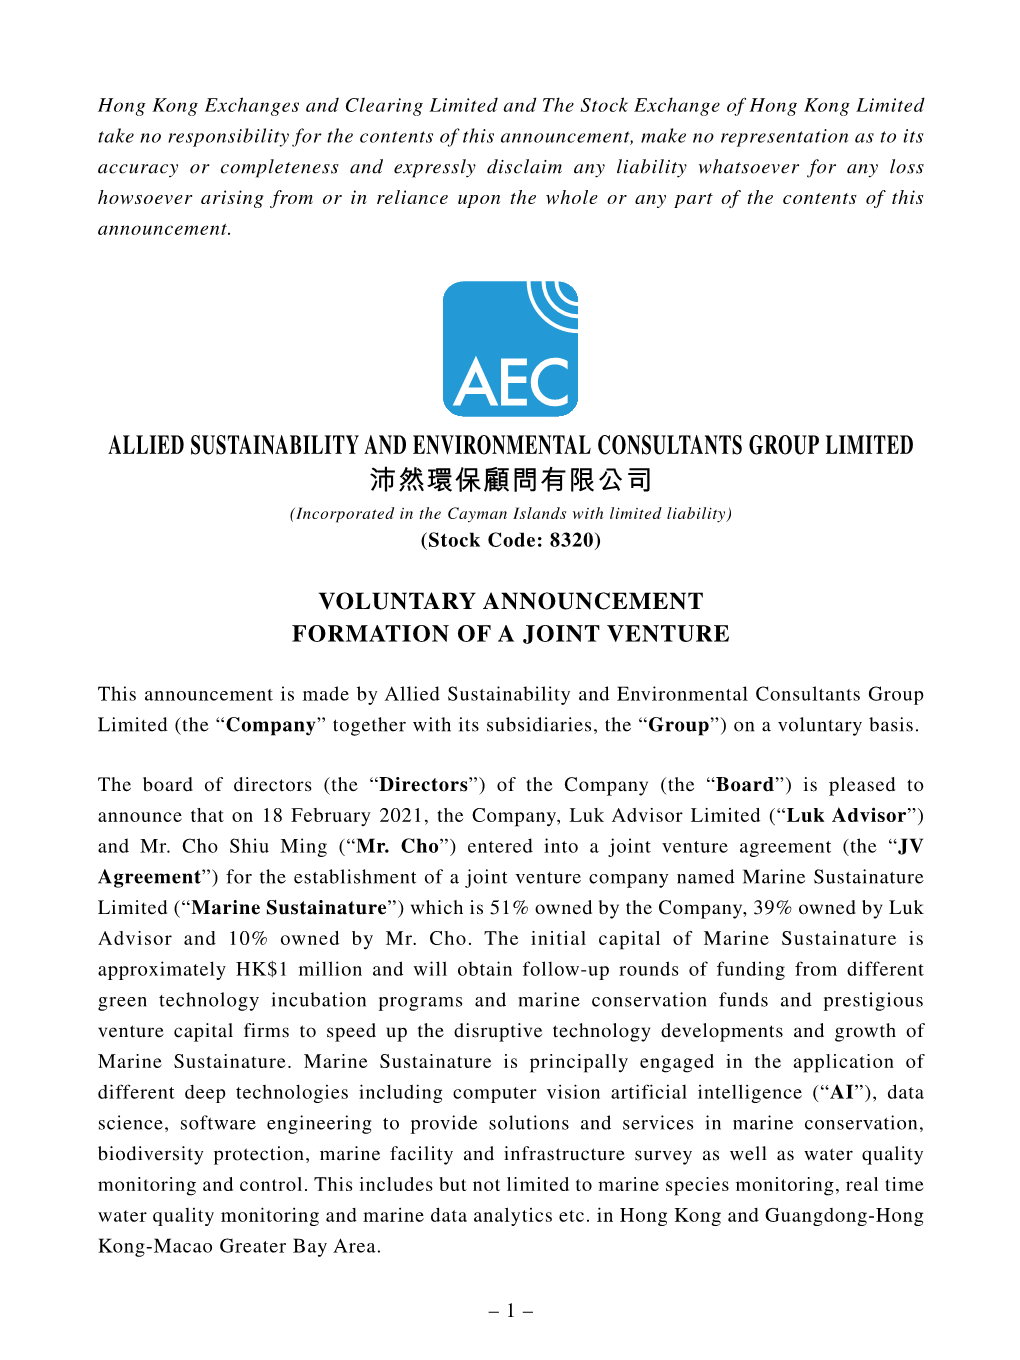 ALLIED SUSTAINABILITY and ENVIRONMENTAL CONSULTANTS GROUP LIMITED 沛然環保顧問有限公司 (Incorporated in the Cayman Islands with Limited Liability) (Stock Code: 8320)